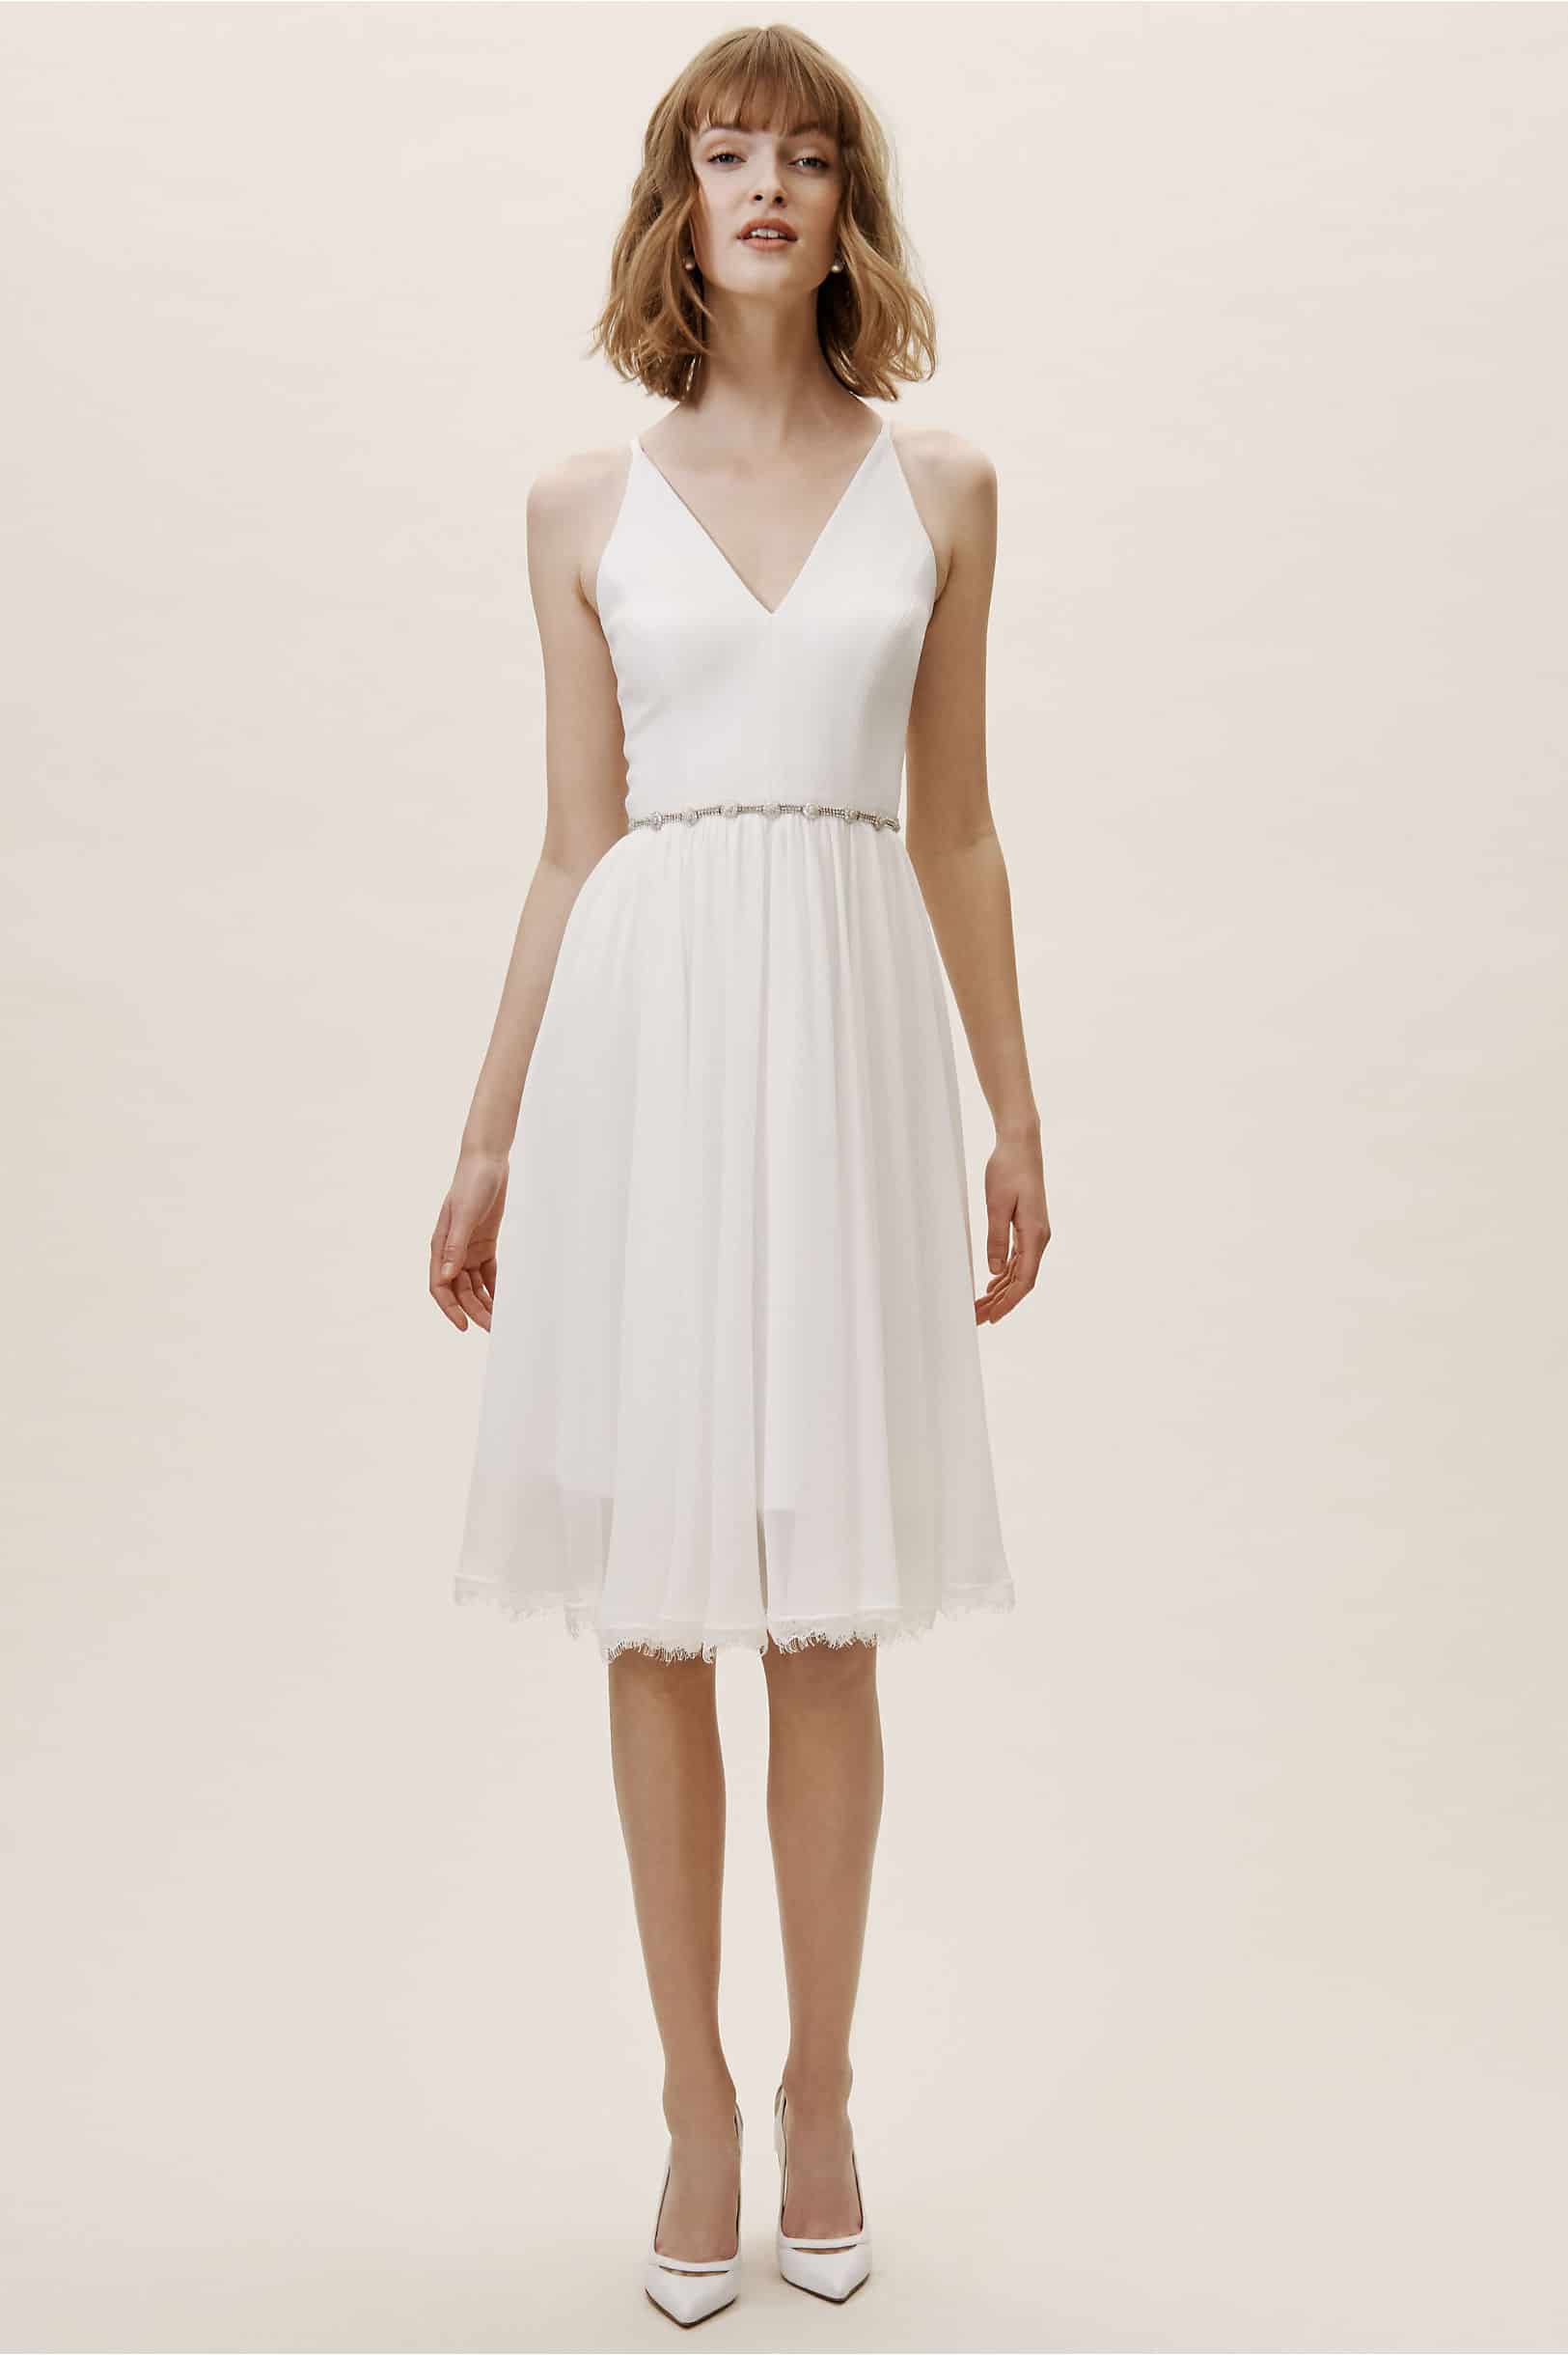 15 Prettiest City Hall Wedding Dresses And Courthouse Bridal Outfits